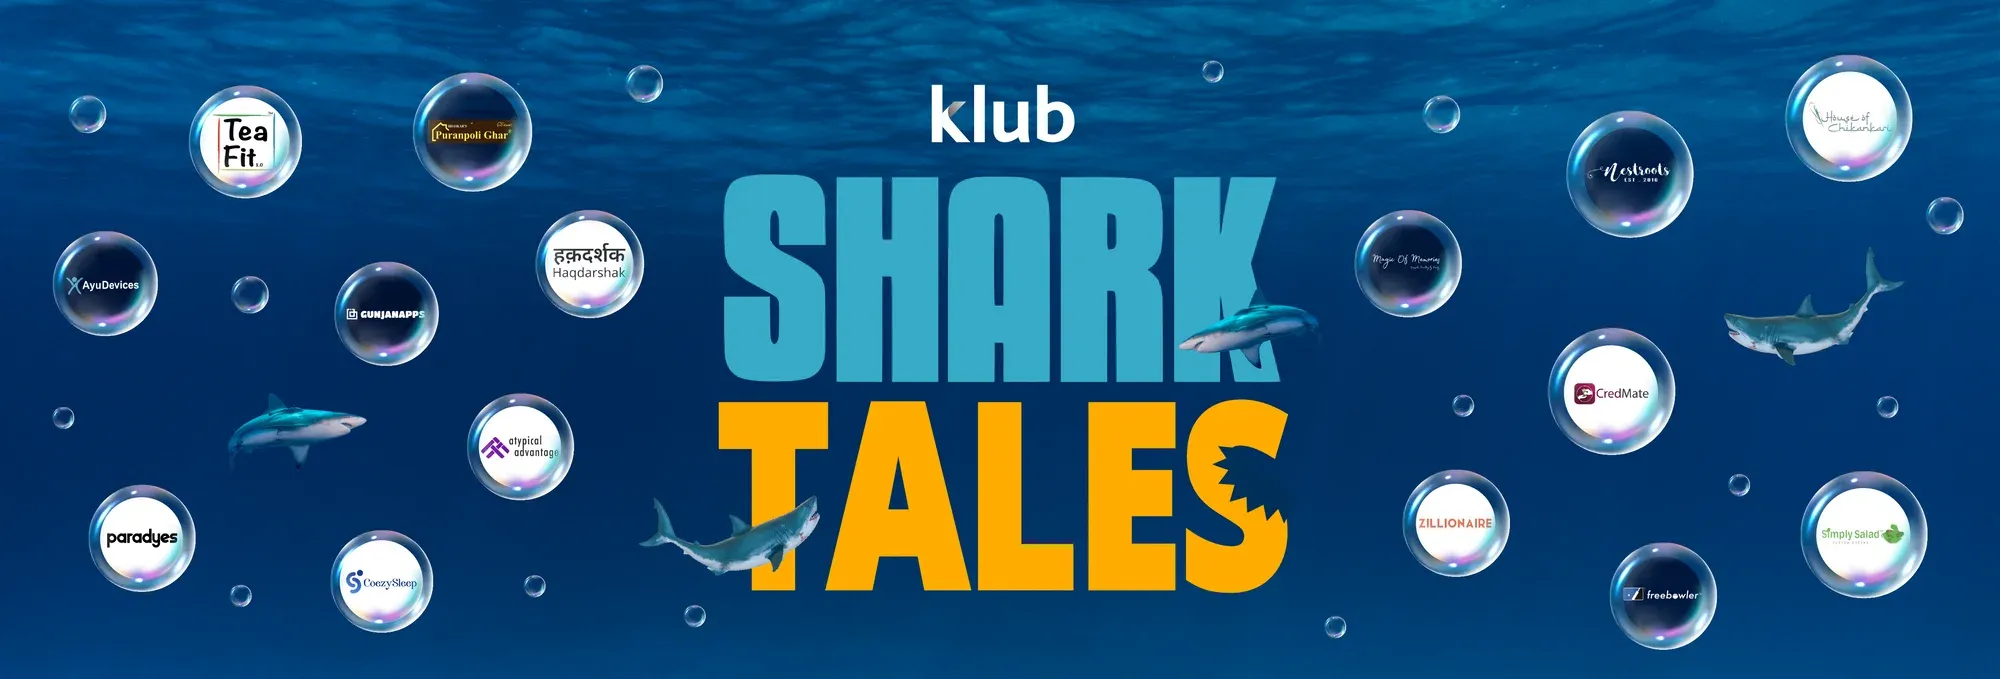 These entrepreneurs braved the odds to strike an opportunity | Shark Tales - Week 2